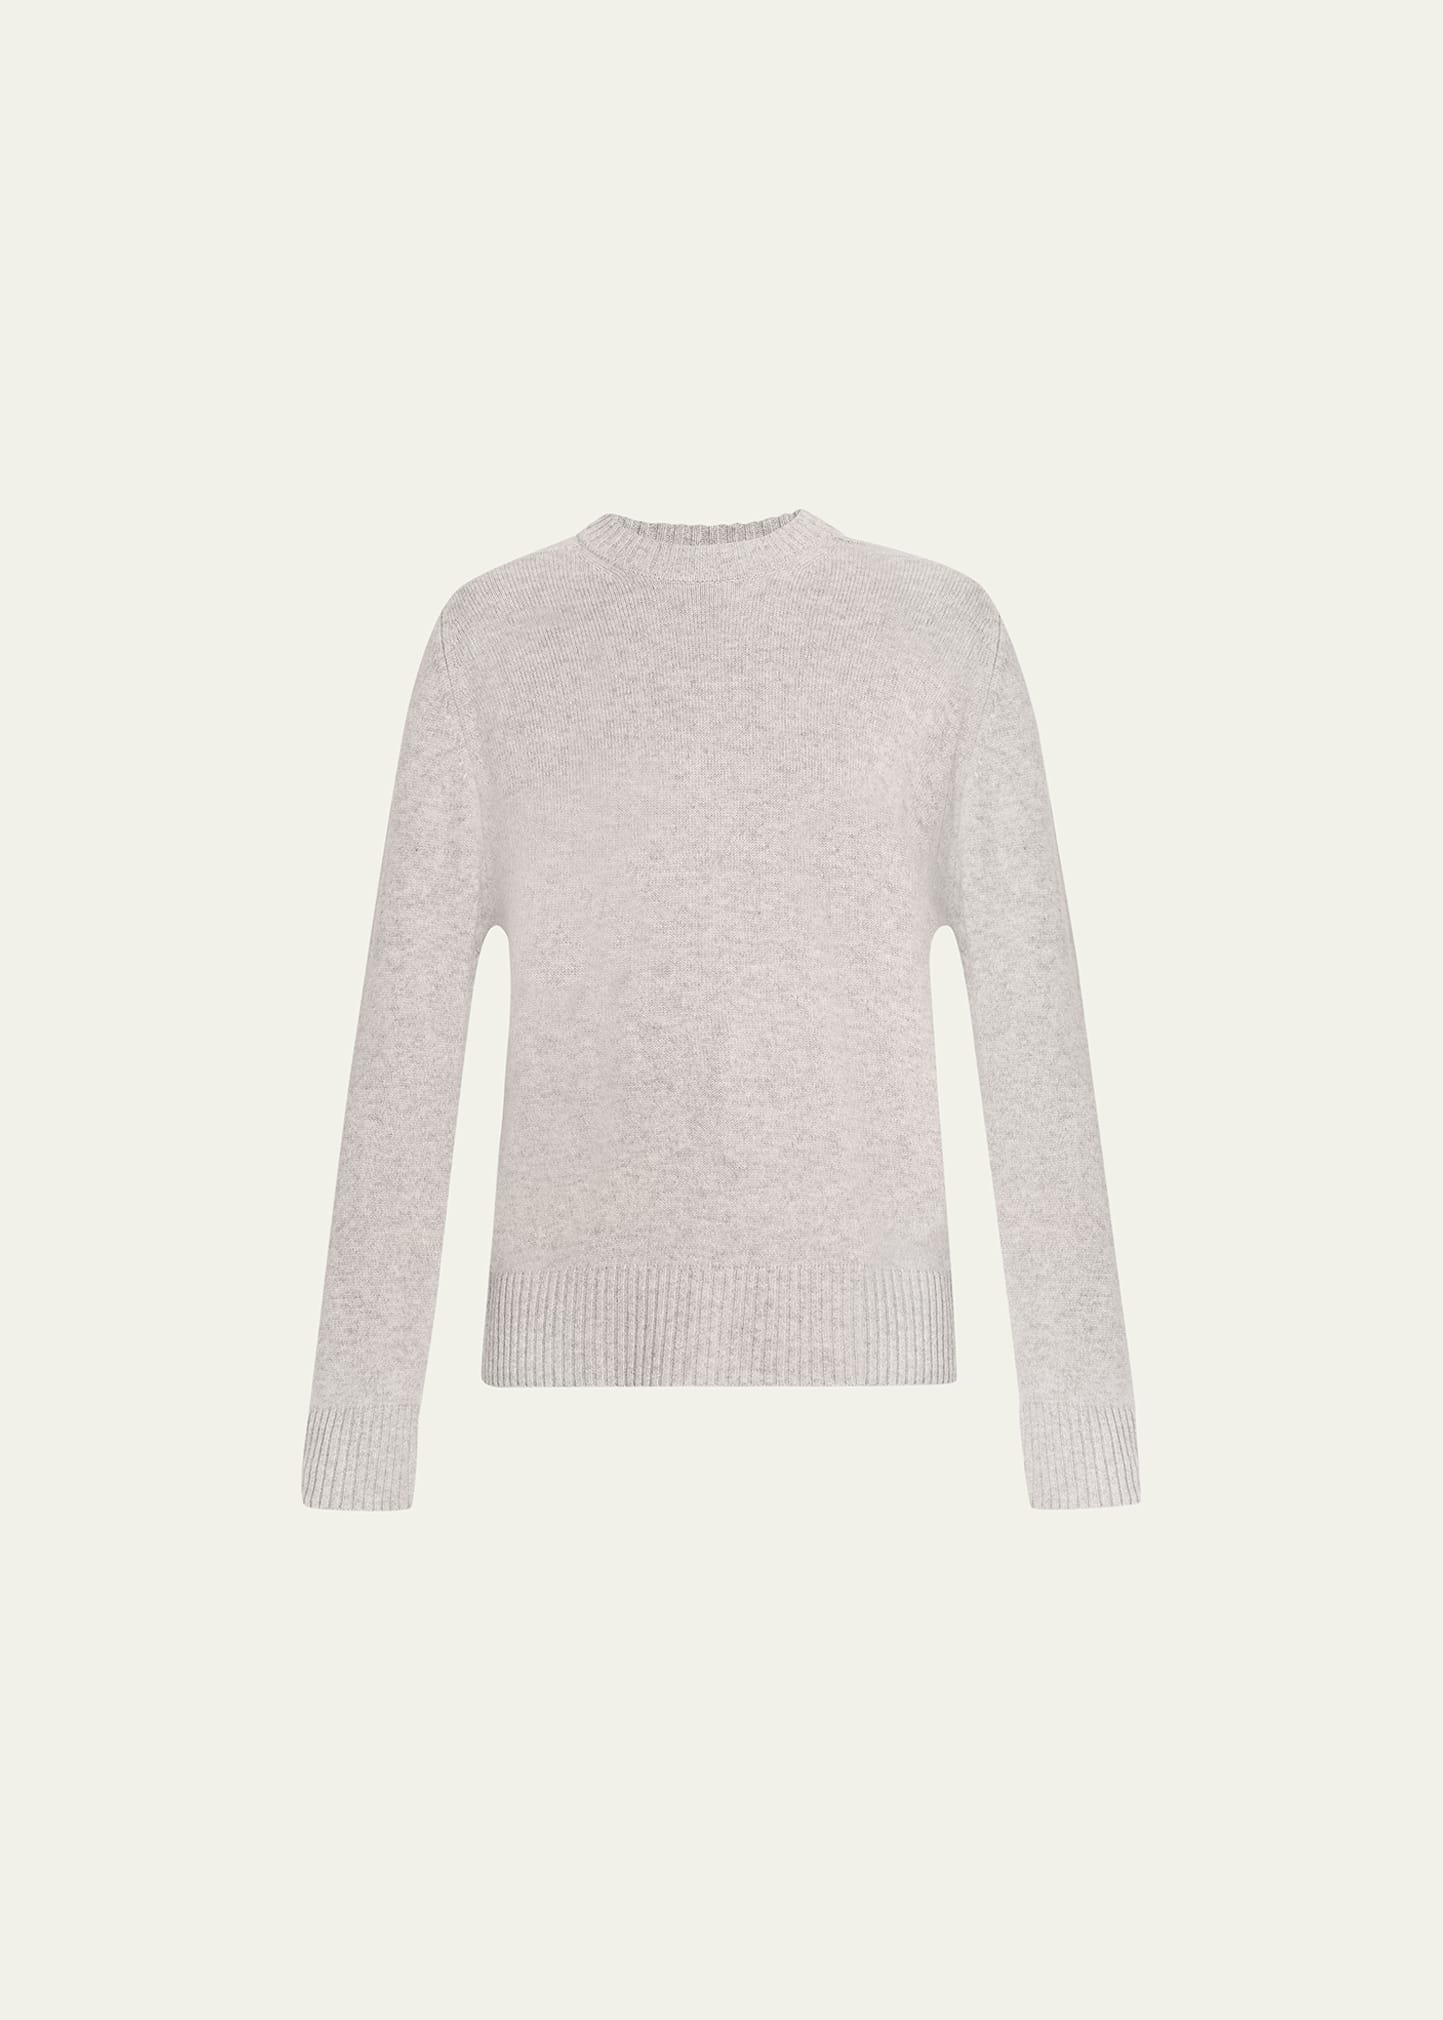 Loulou Studio Baltra Cashmere Knit Sweater In Grey Melange